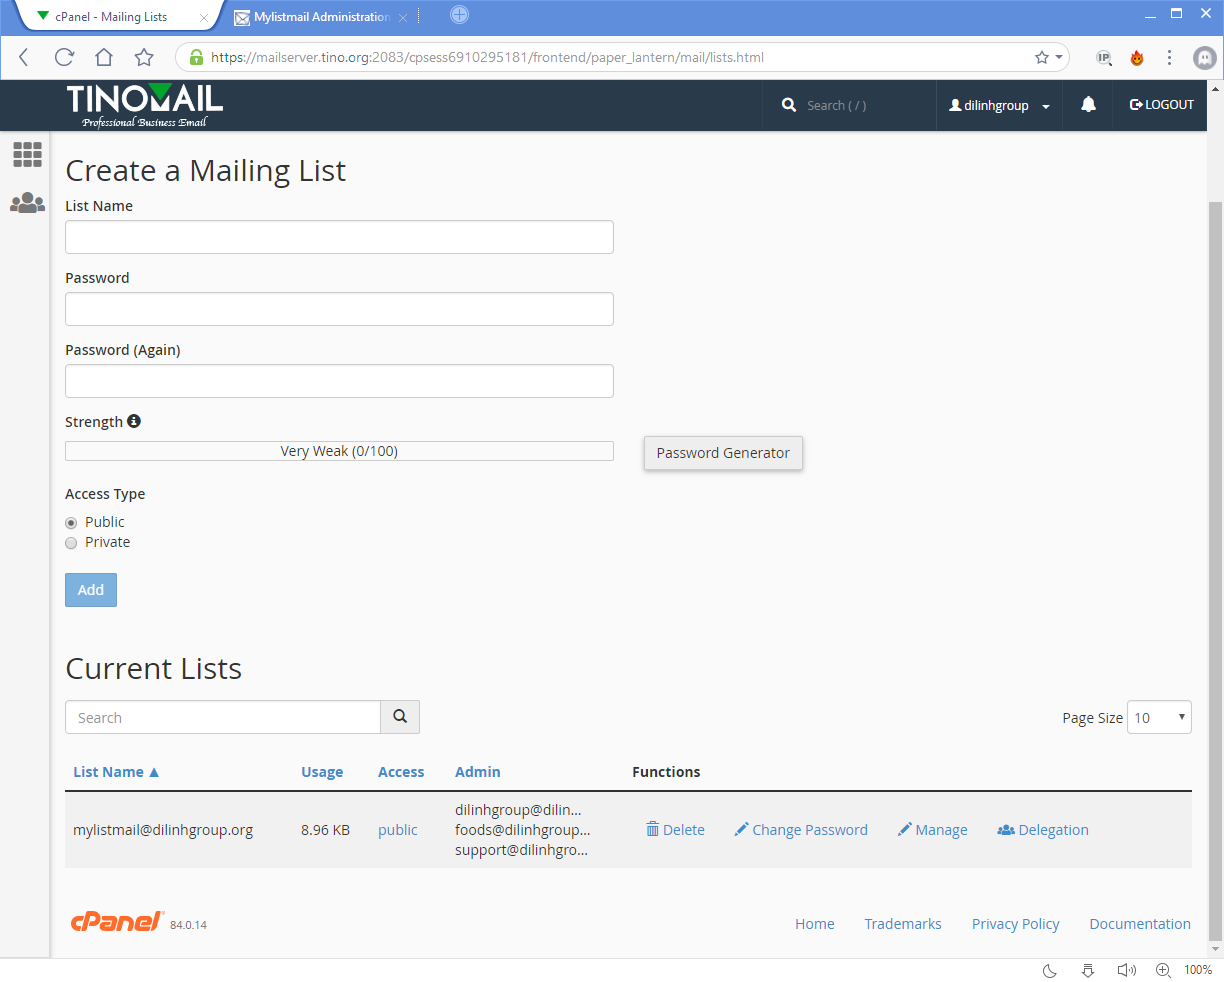 [cPanel] - Mailing Lists 17